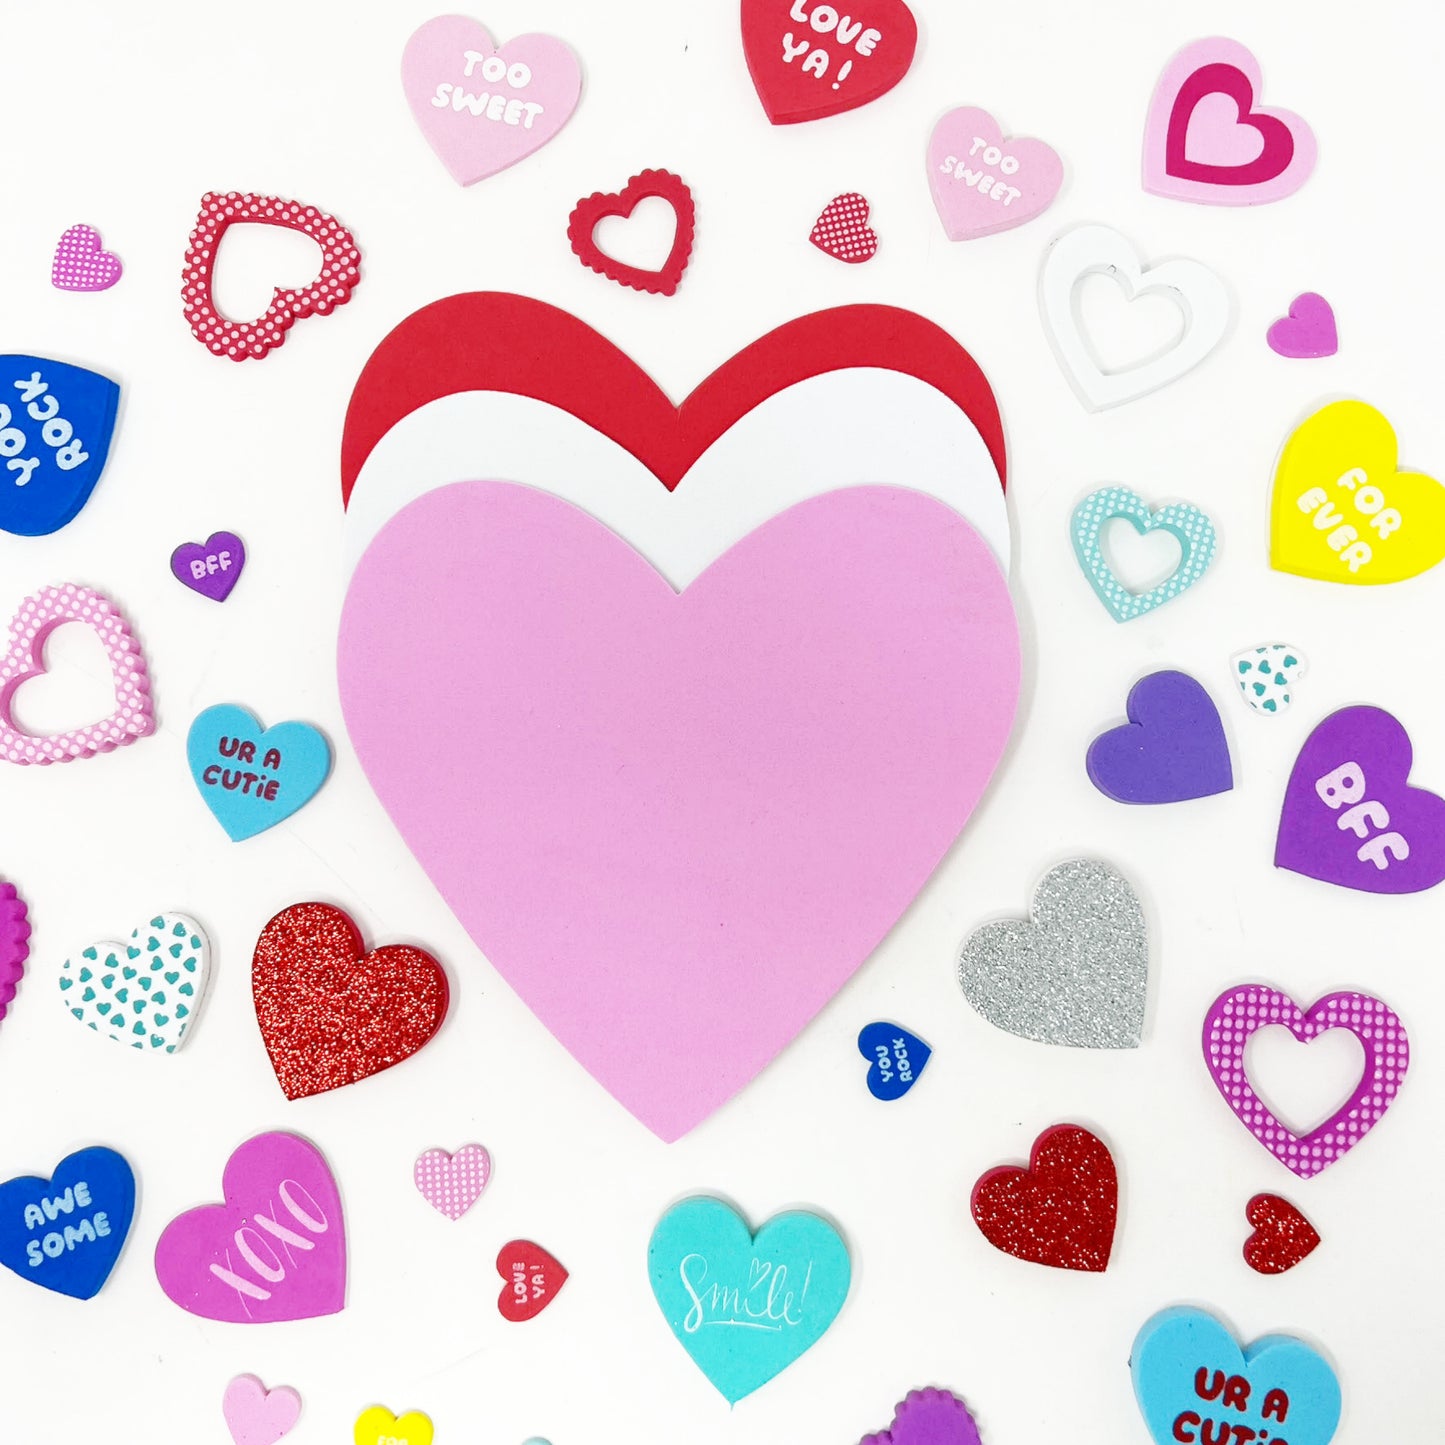 Cheep N Cheerful Valentines Day Craft Set, 30 Foam Hearts, 80 Foam Heart Stickers, Valentine's Day Party Décor, 110 Pcs